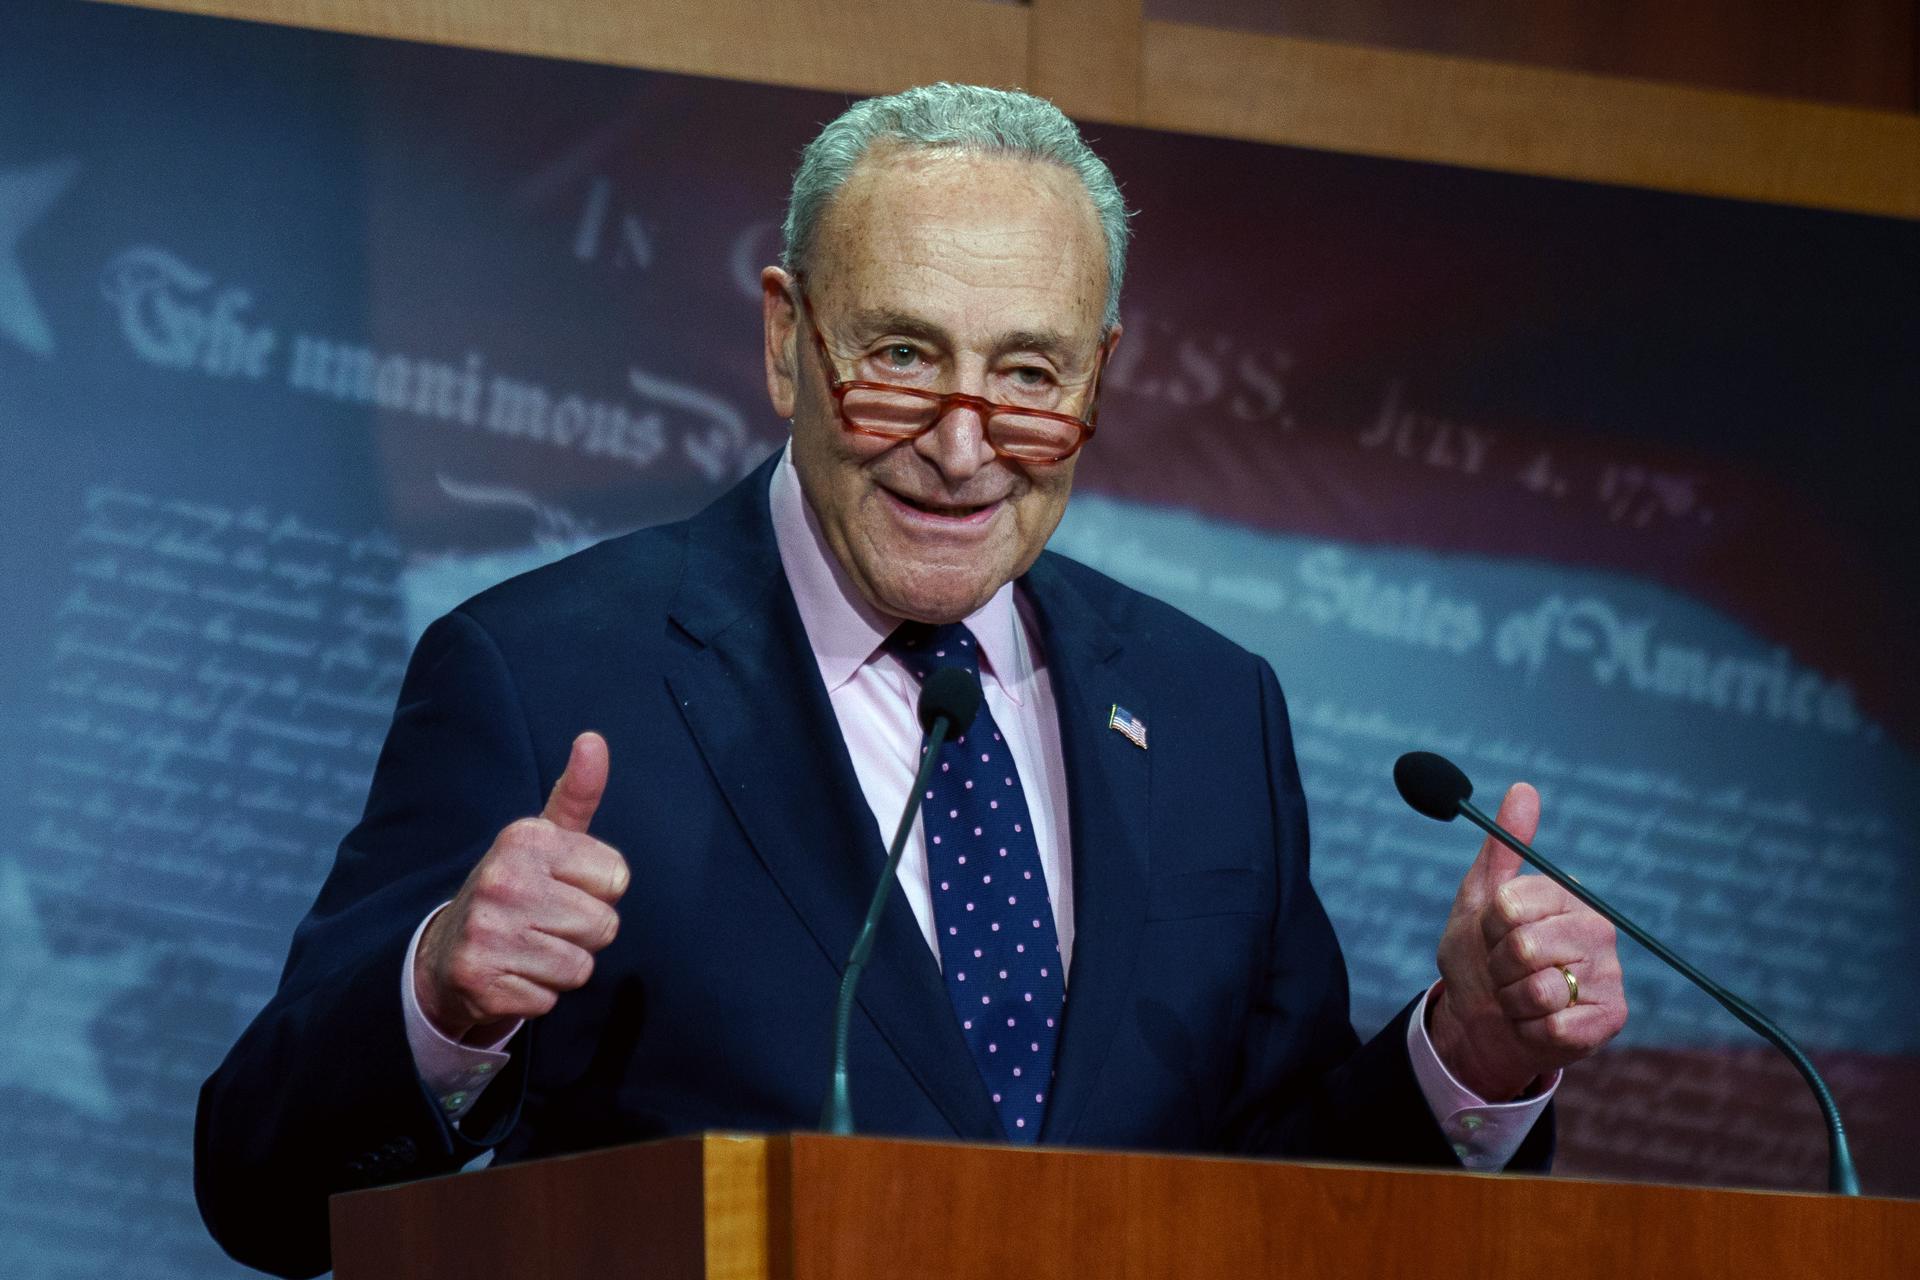 Senate Majority Leader Chuck Schumer gestures during a news conference at the US Capitol in Washington, DC, USA, 14 November 2023. EFE/EPA/WILL OLIVER